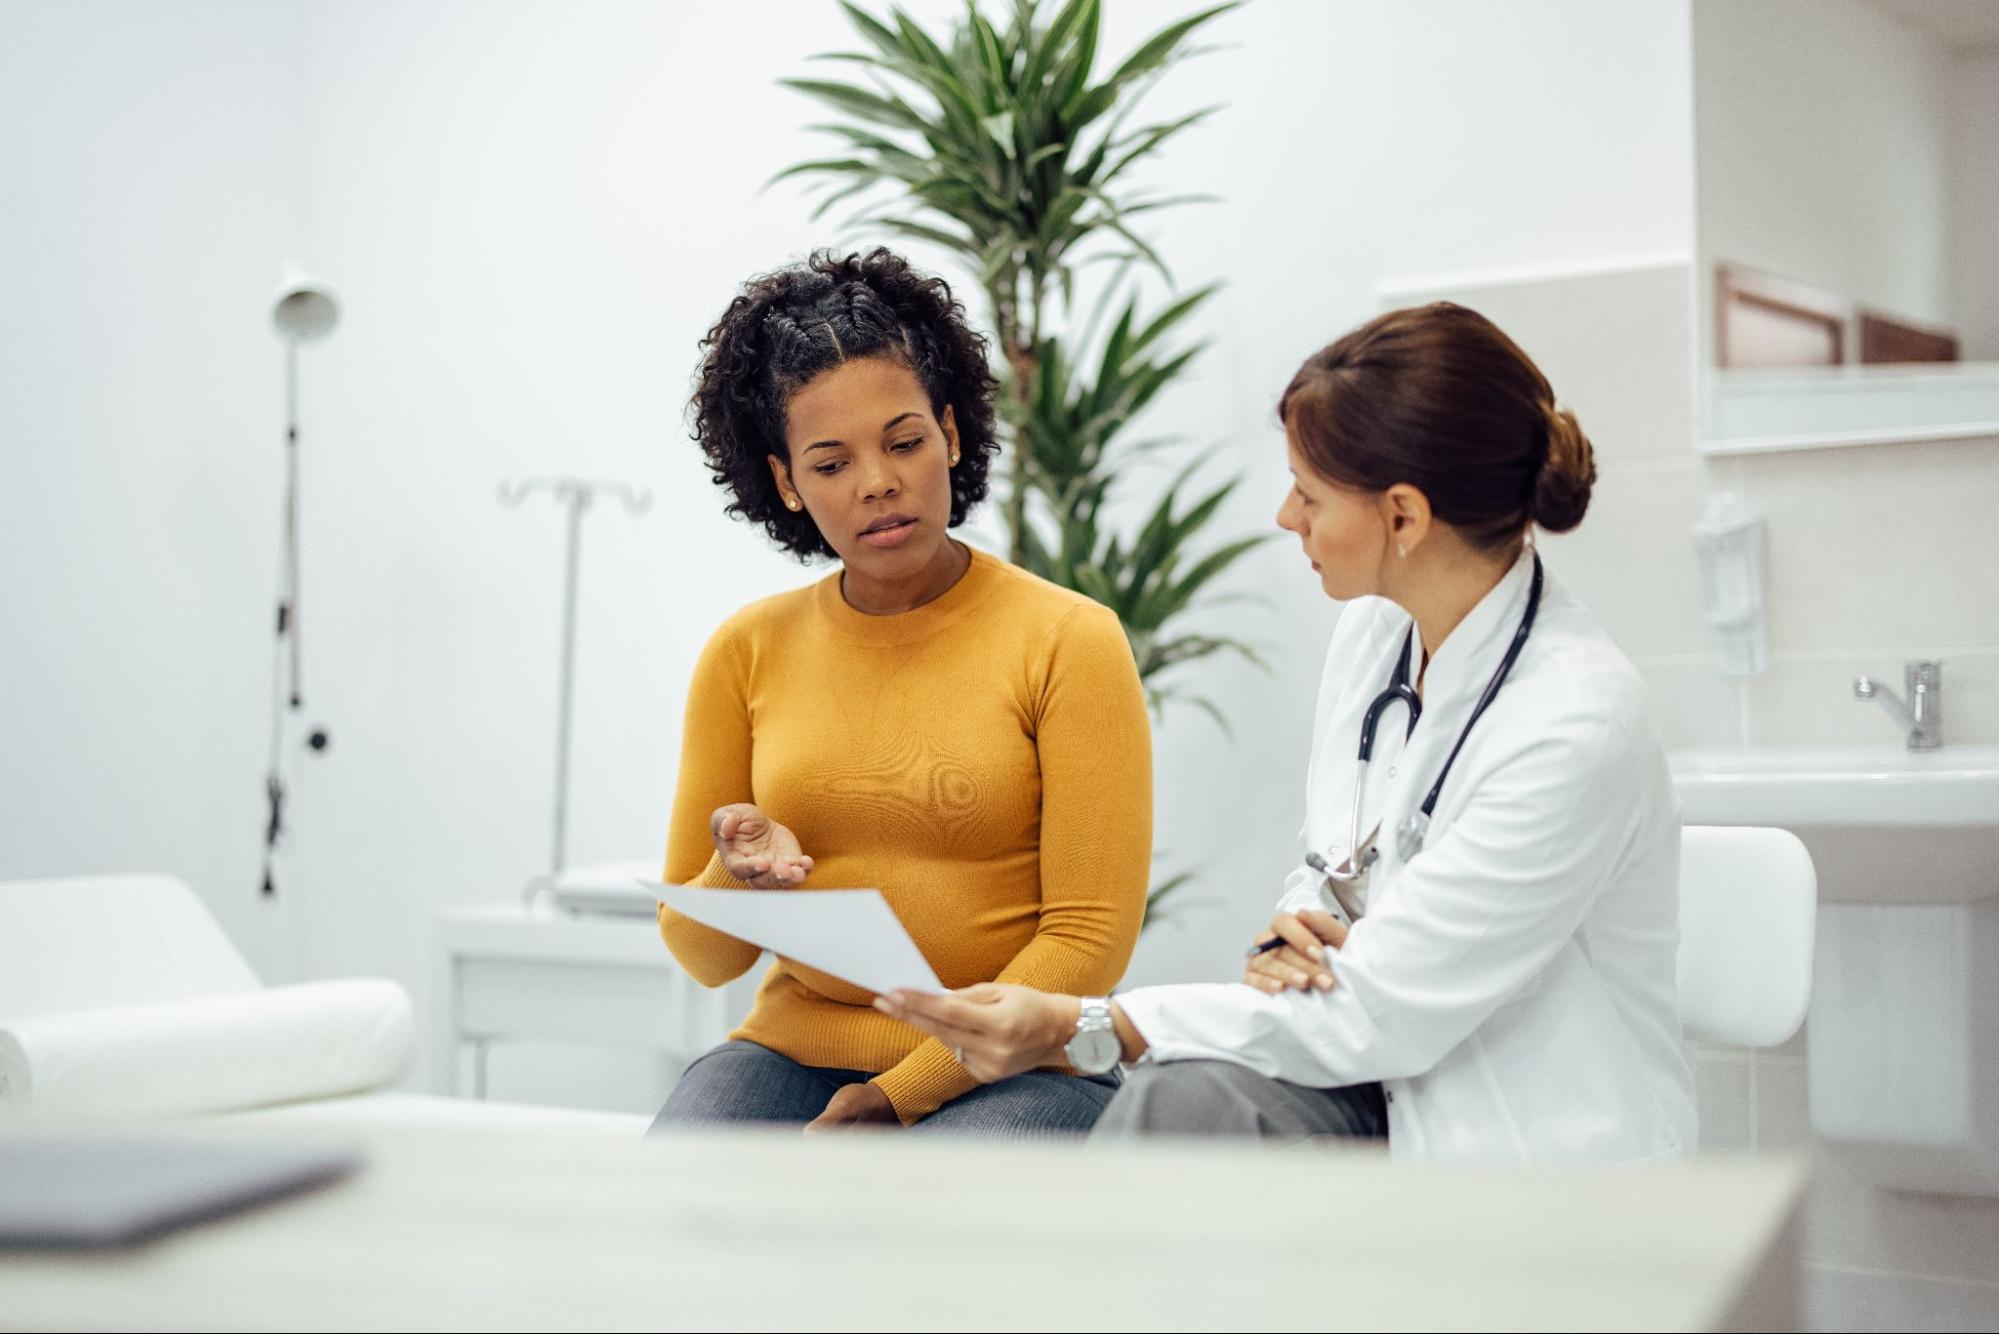 What Are the Benefits of Urogynecology Services for Women?